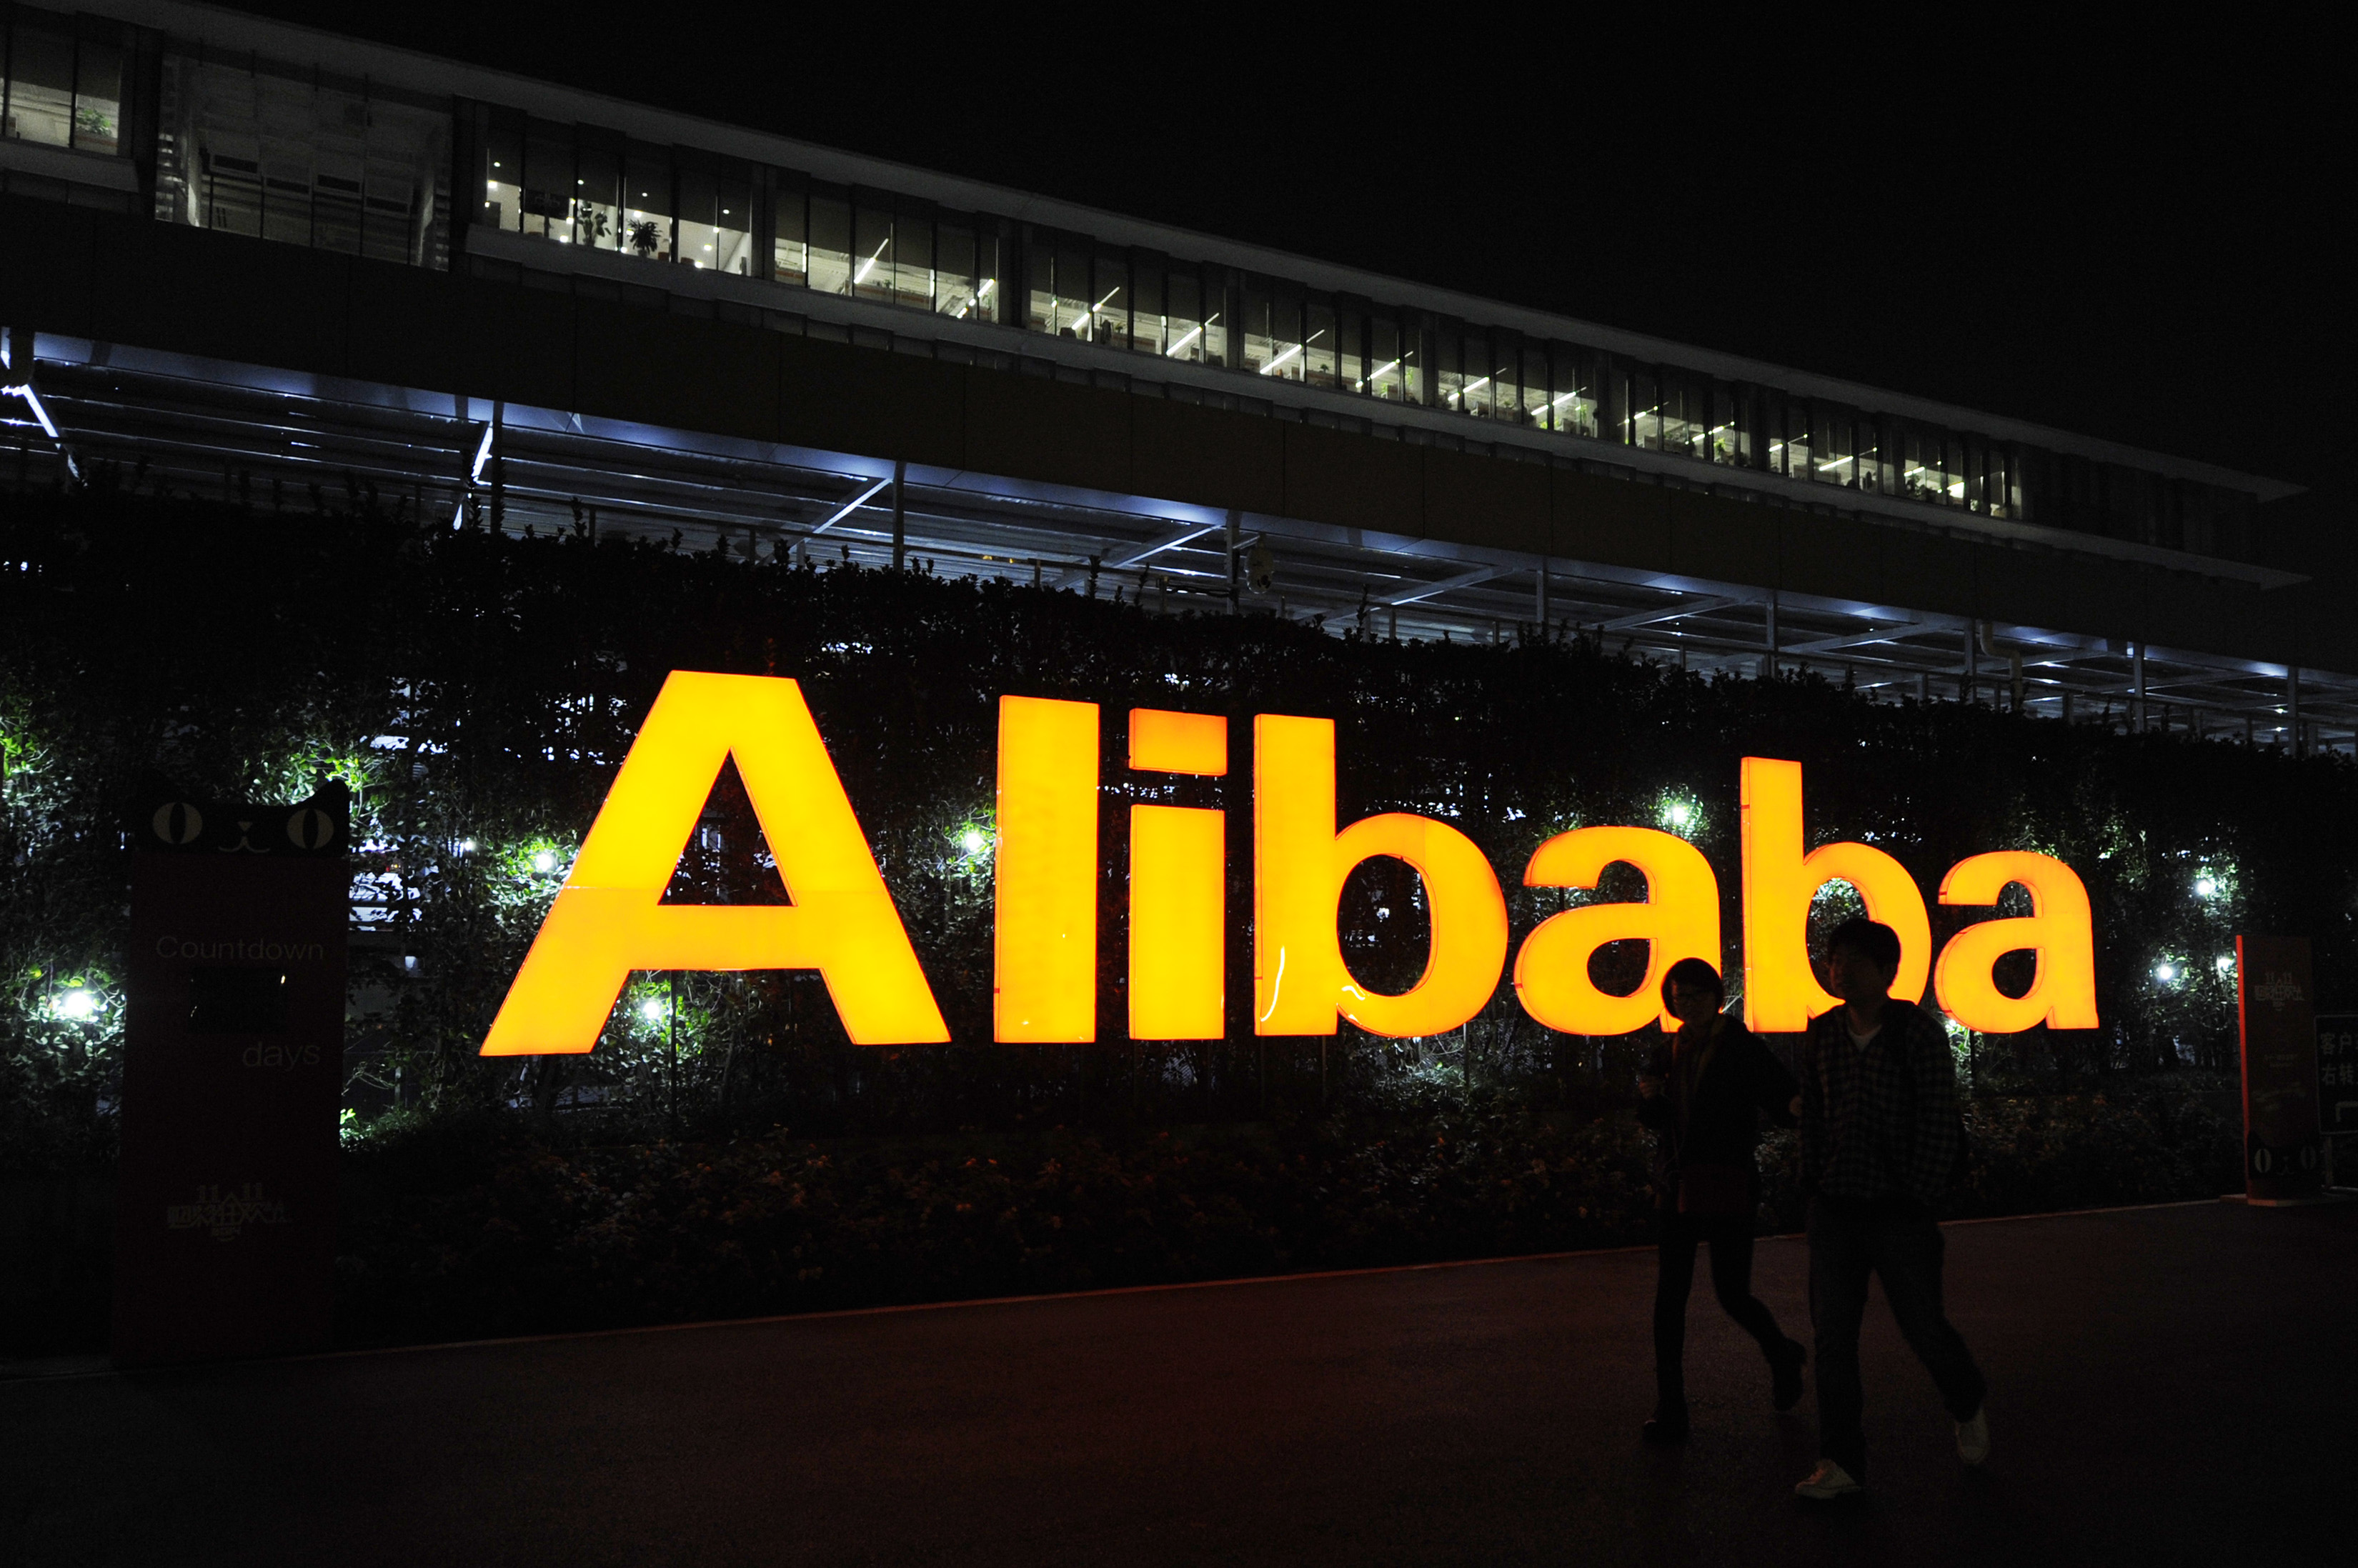 An audit revealed that nearly two-thirds of merchandise sold in Alibaba's popular Taobao marketplace was fake. Photo: Xinhua